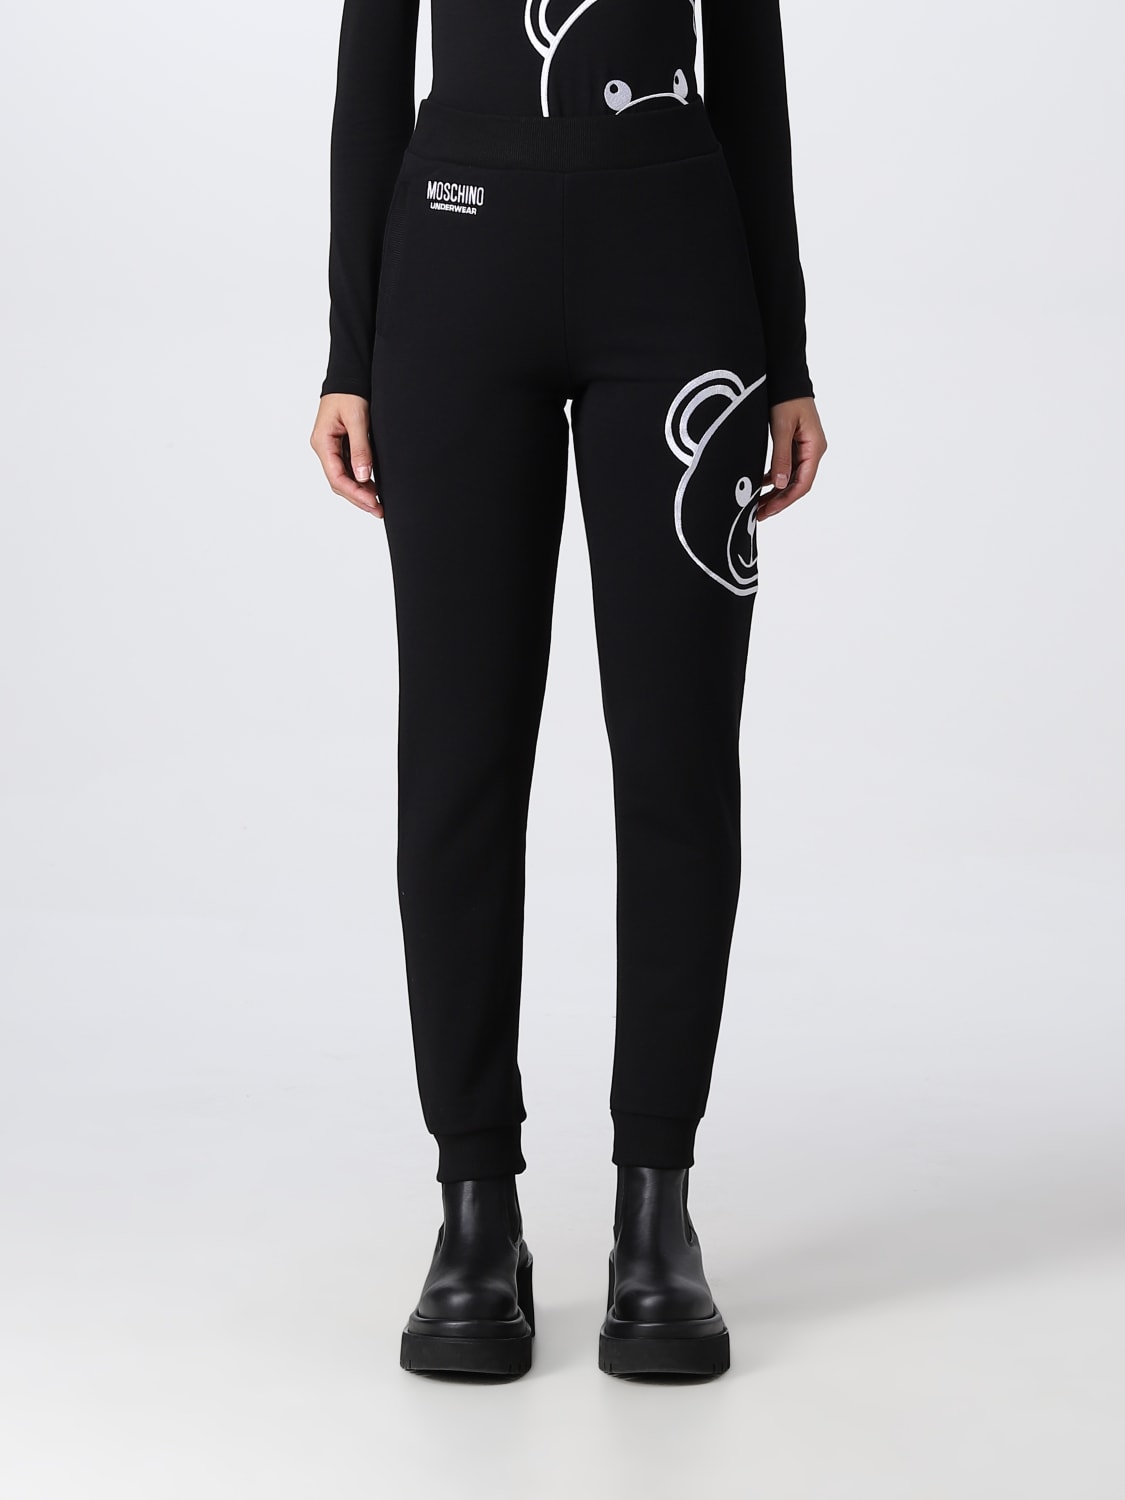 Moschino Underwear Outlet: pants for woman - Black  Moschino Underwear  pants A43029021 online at